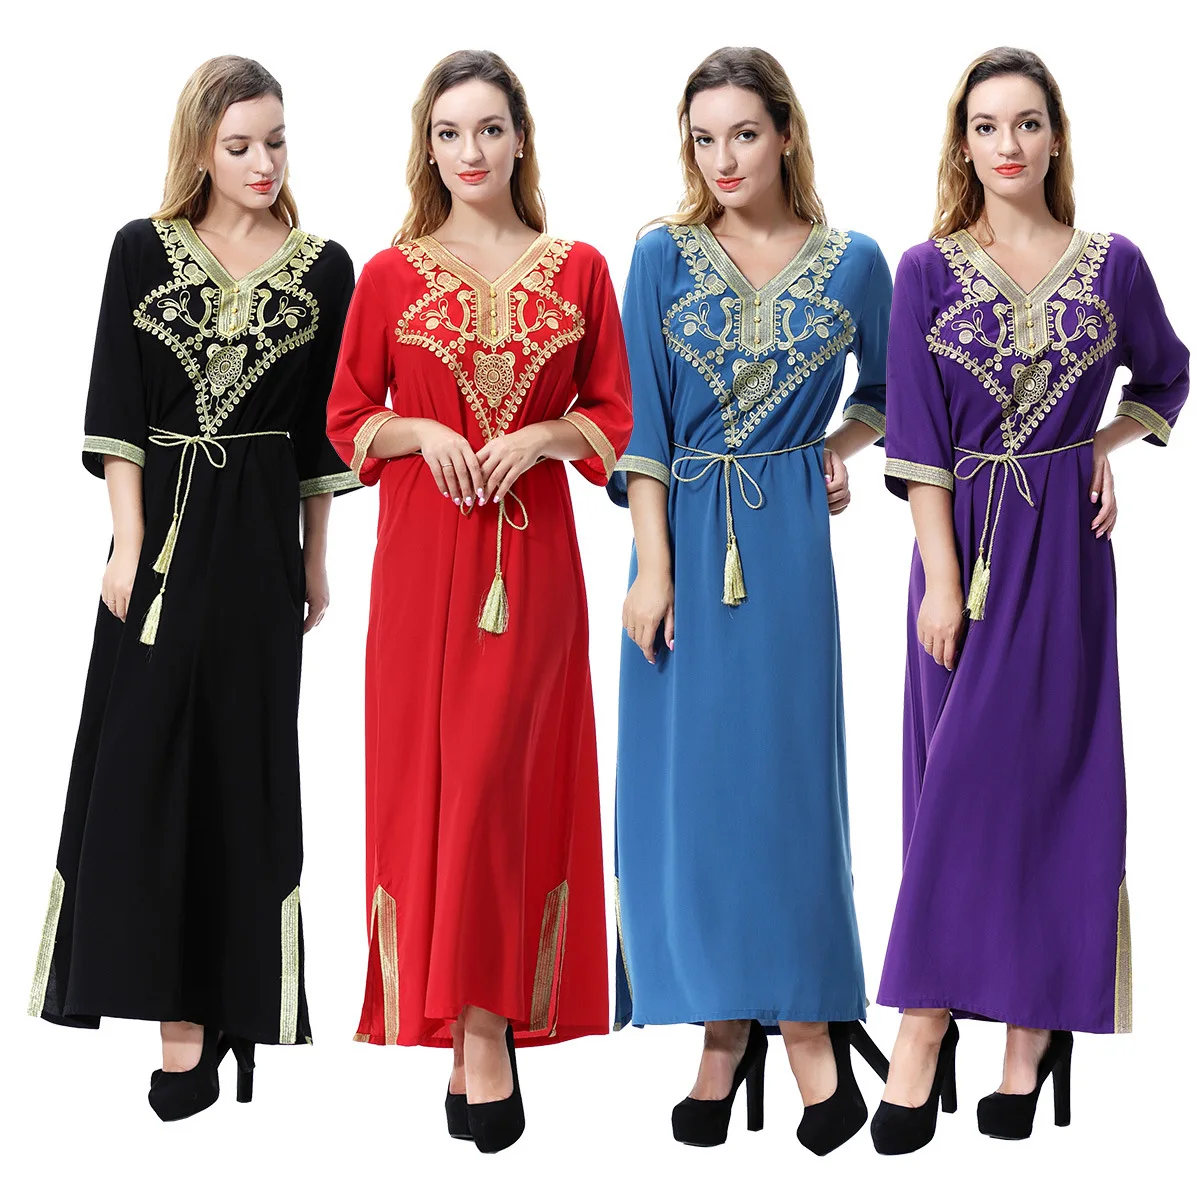 

S-3XL Female Loose Ethnic Style Long Dress V-Neck Sexy Appliques Trim Dresses Turkish Muslims Middle East Abaya Casual Skirt